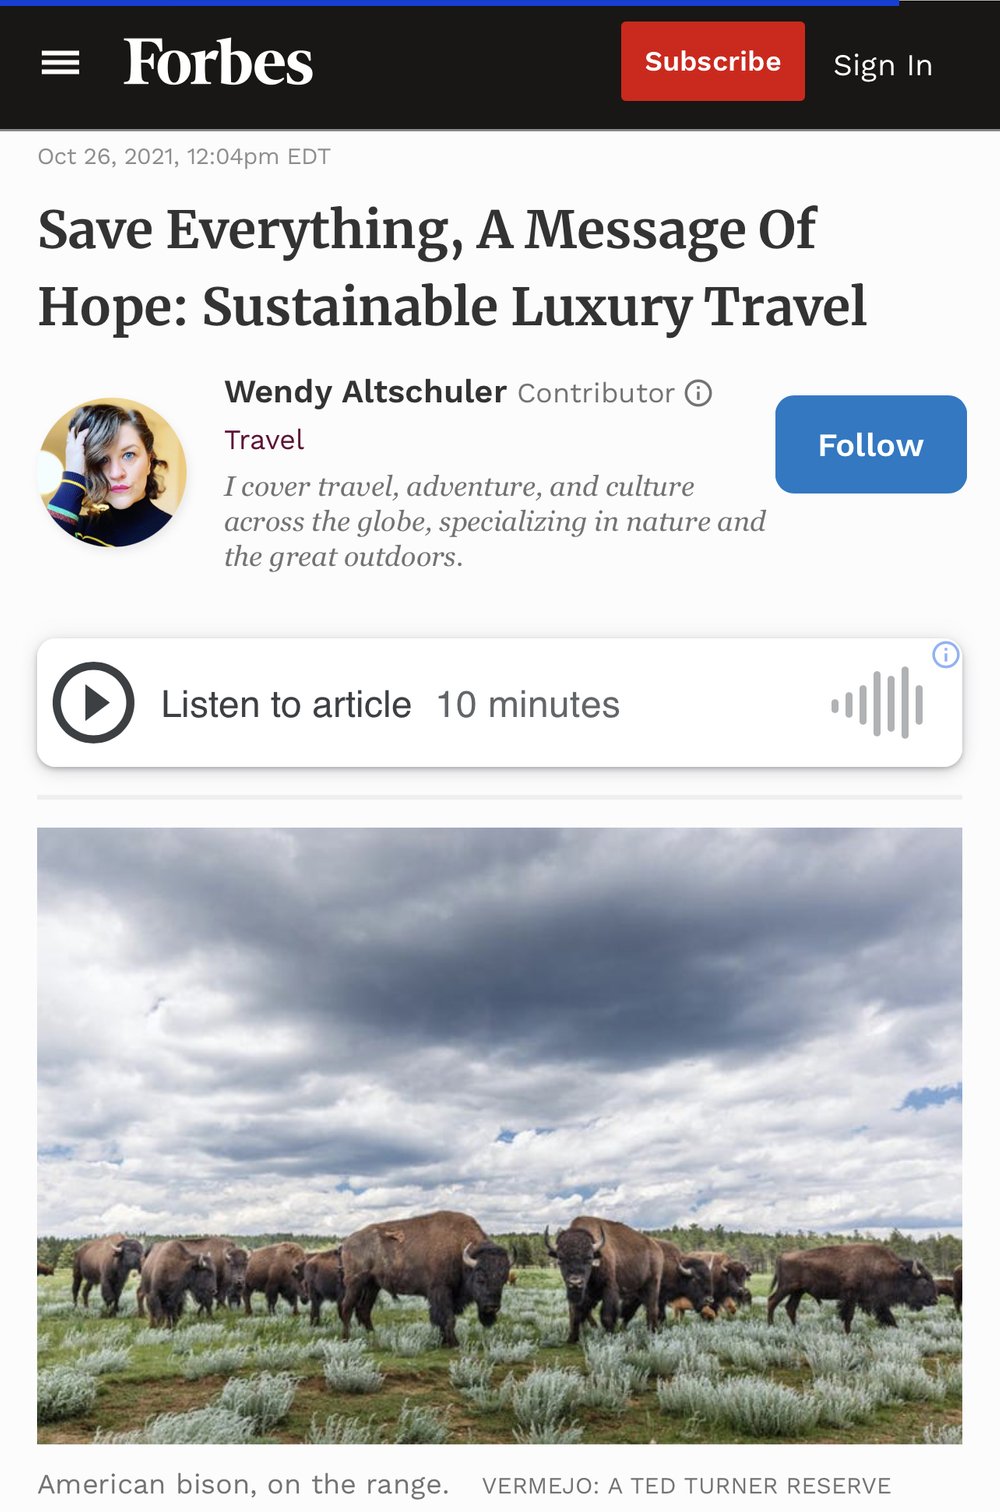 Save Everything, A Message Of Hope: Sustainable Luxury Travel